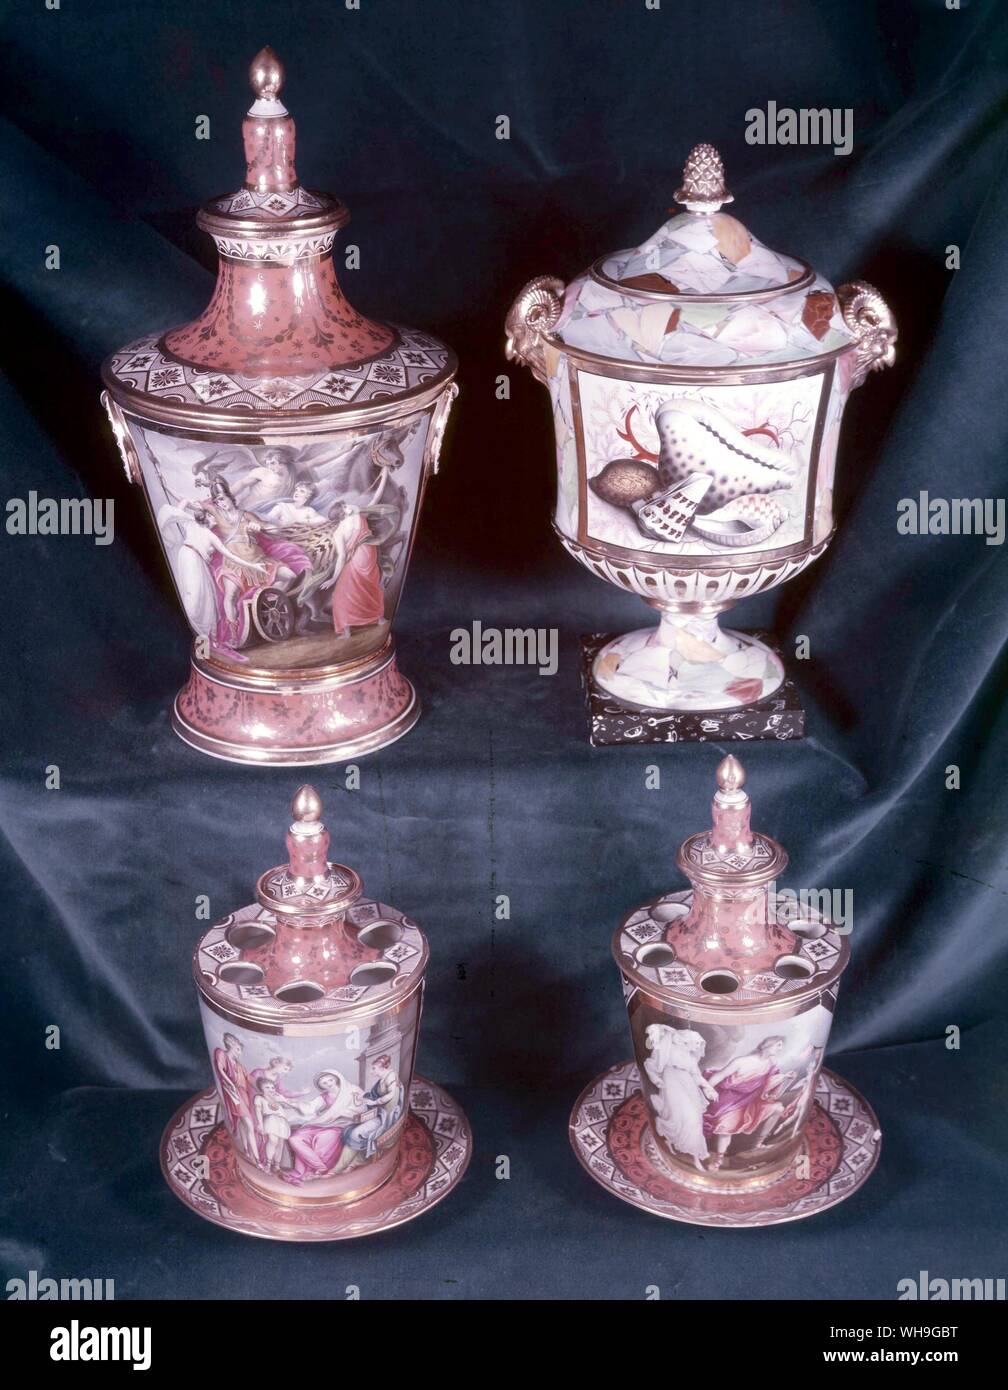 Chamberlain Worcester Vases Banque D'Images